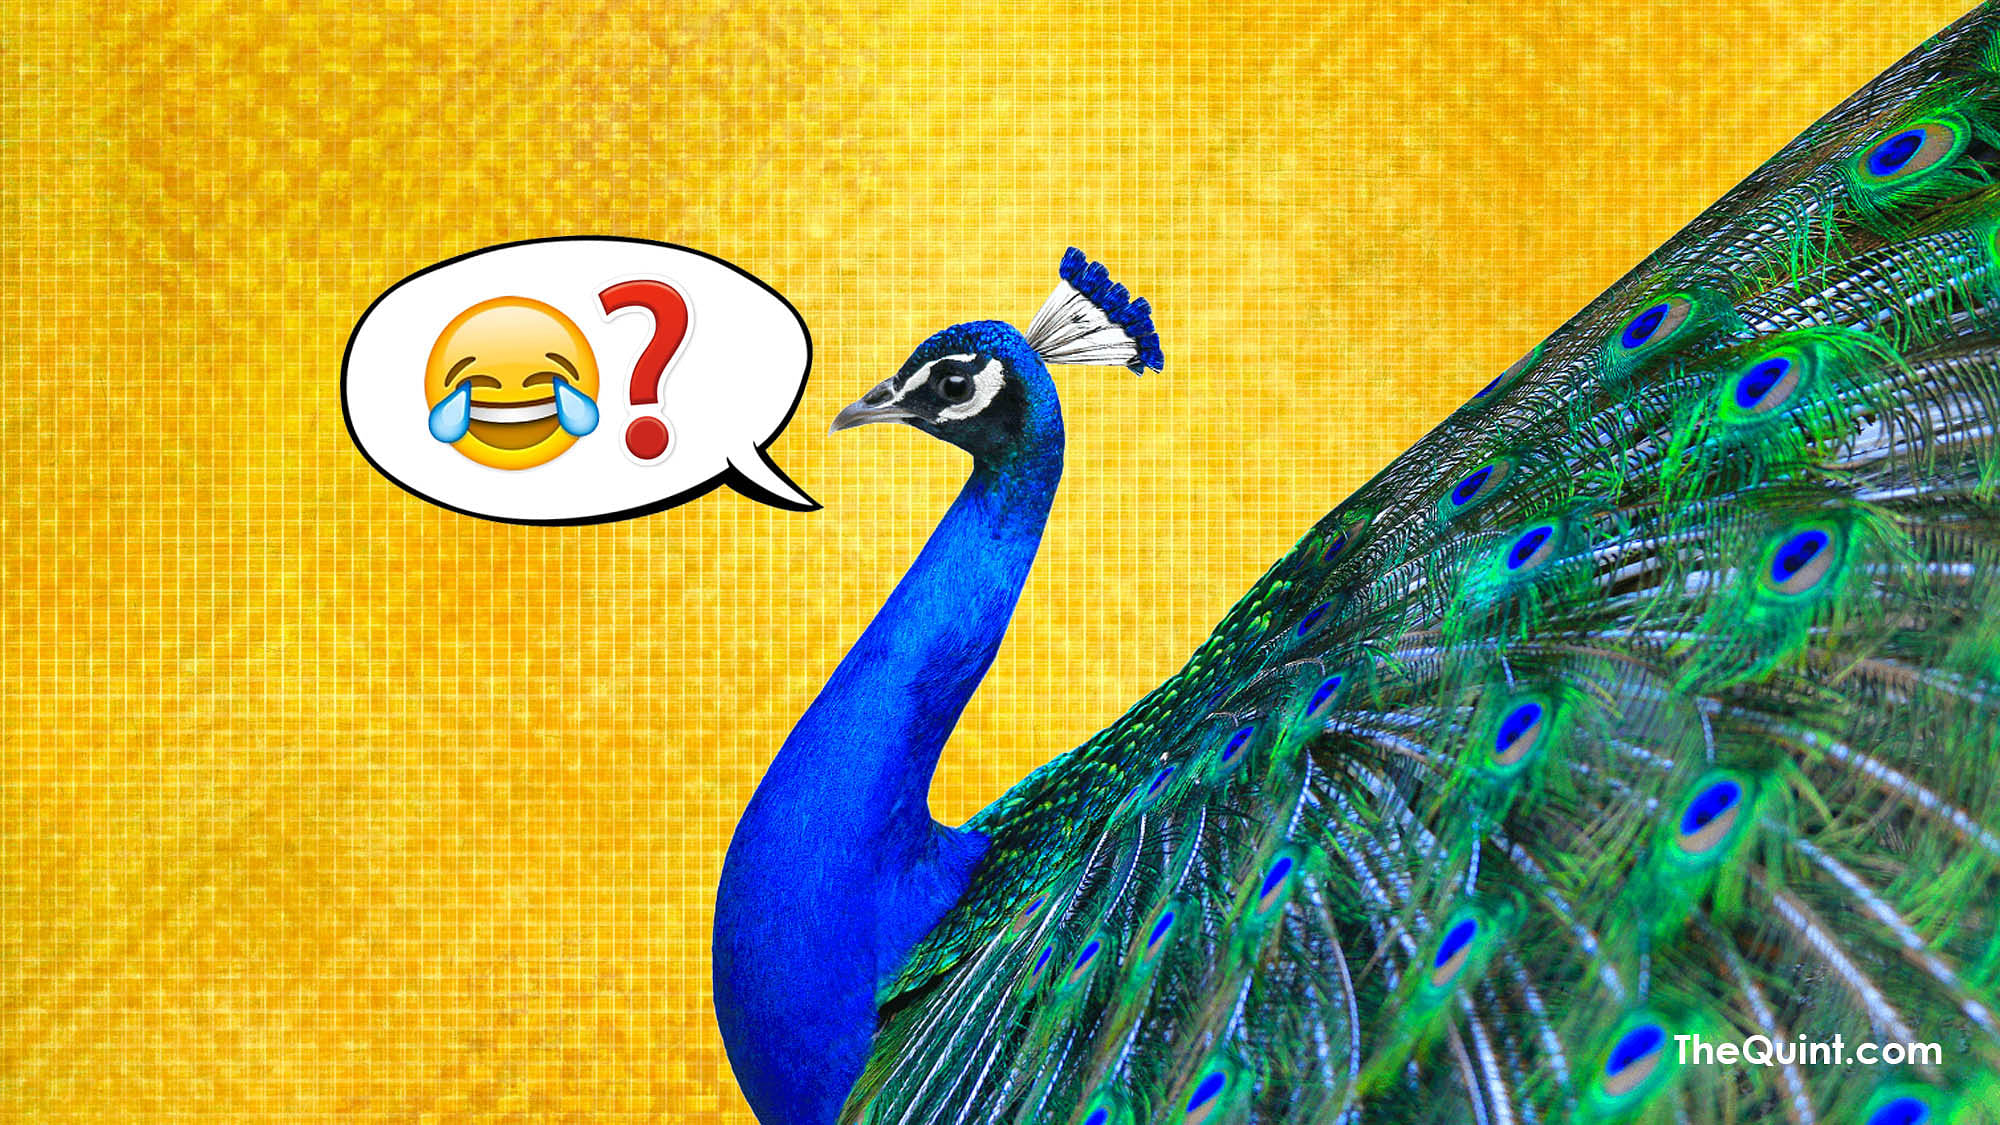 Peacocks are celibate? What’s there to celebrate? (Photo: Aaqib Raza Khan/<b>The Quint</b>)